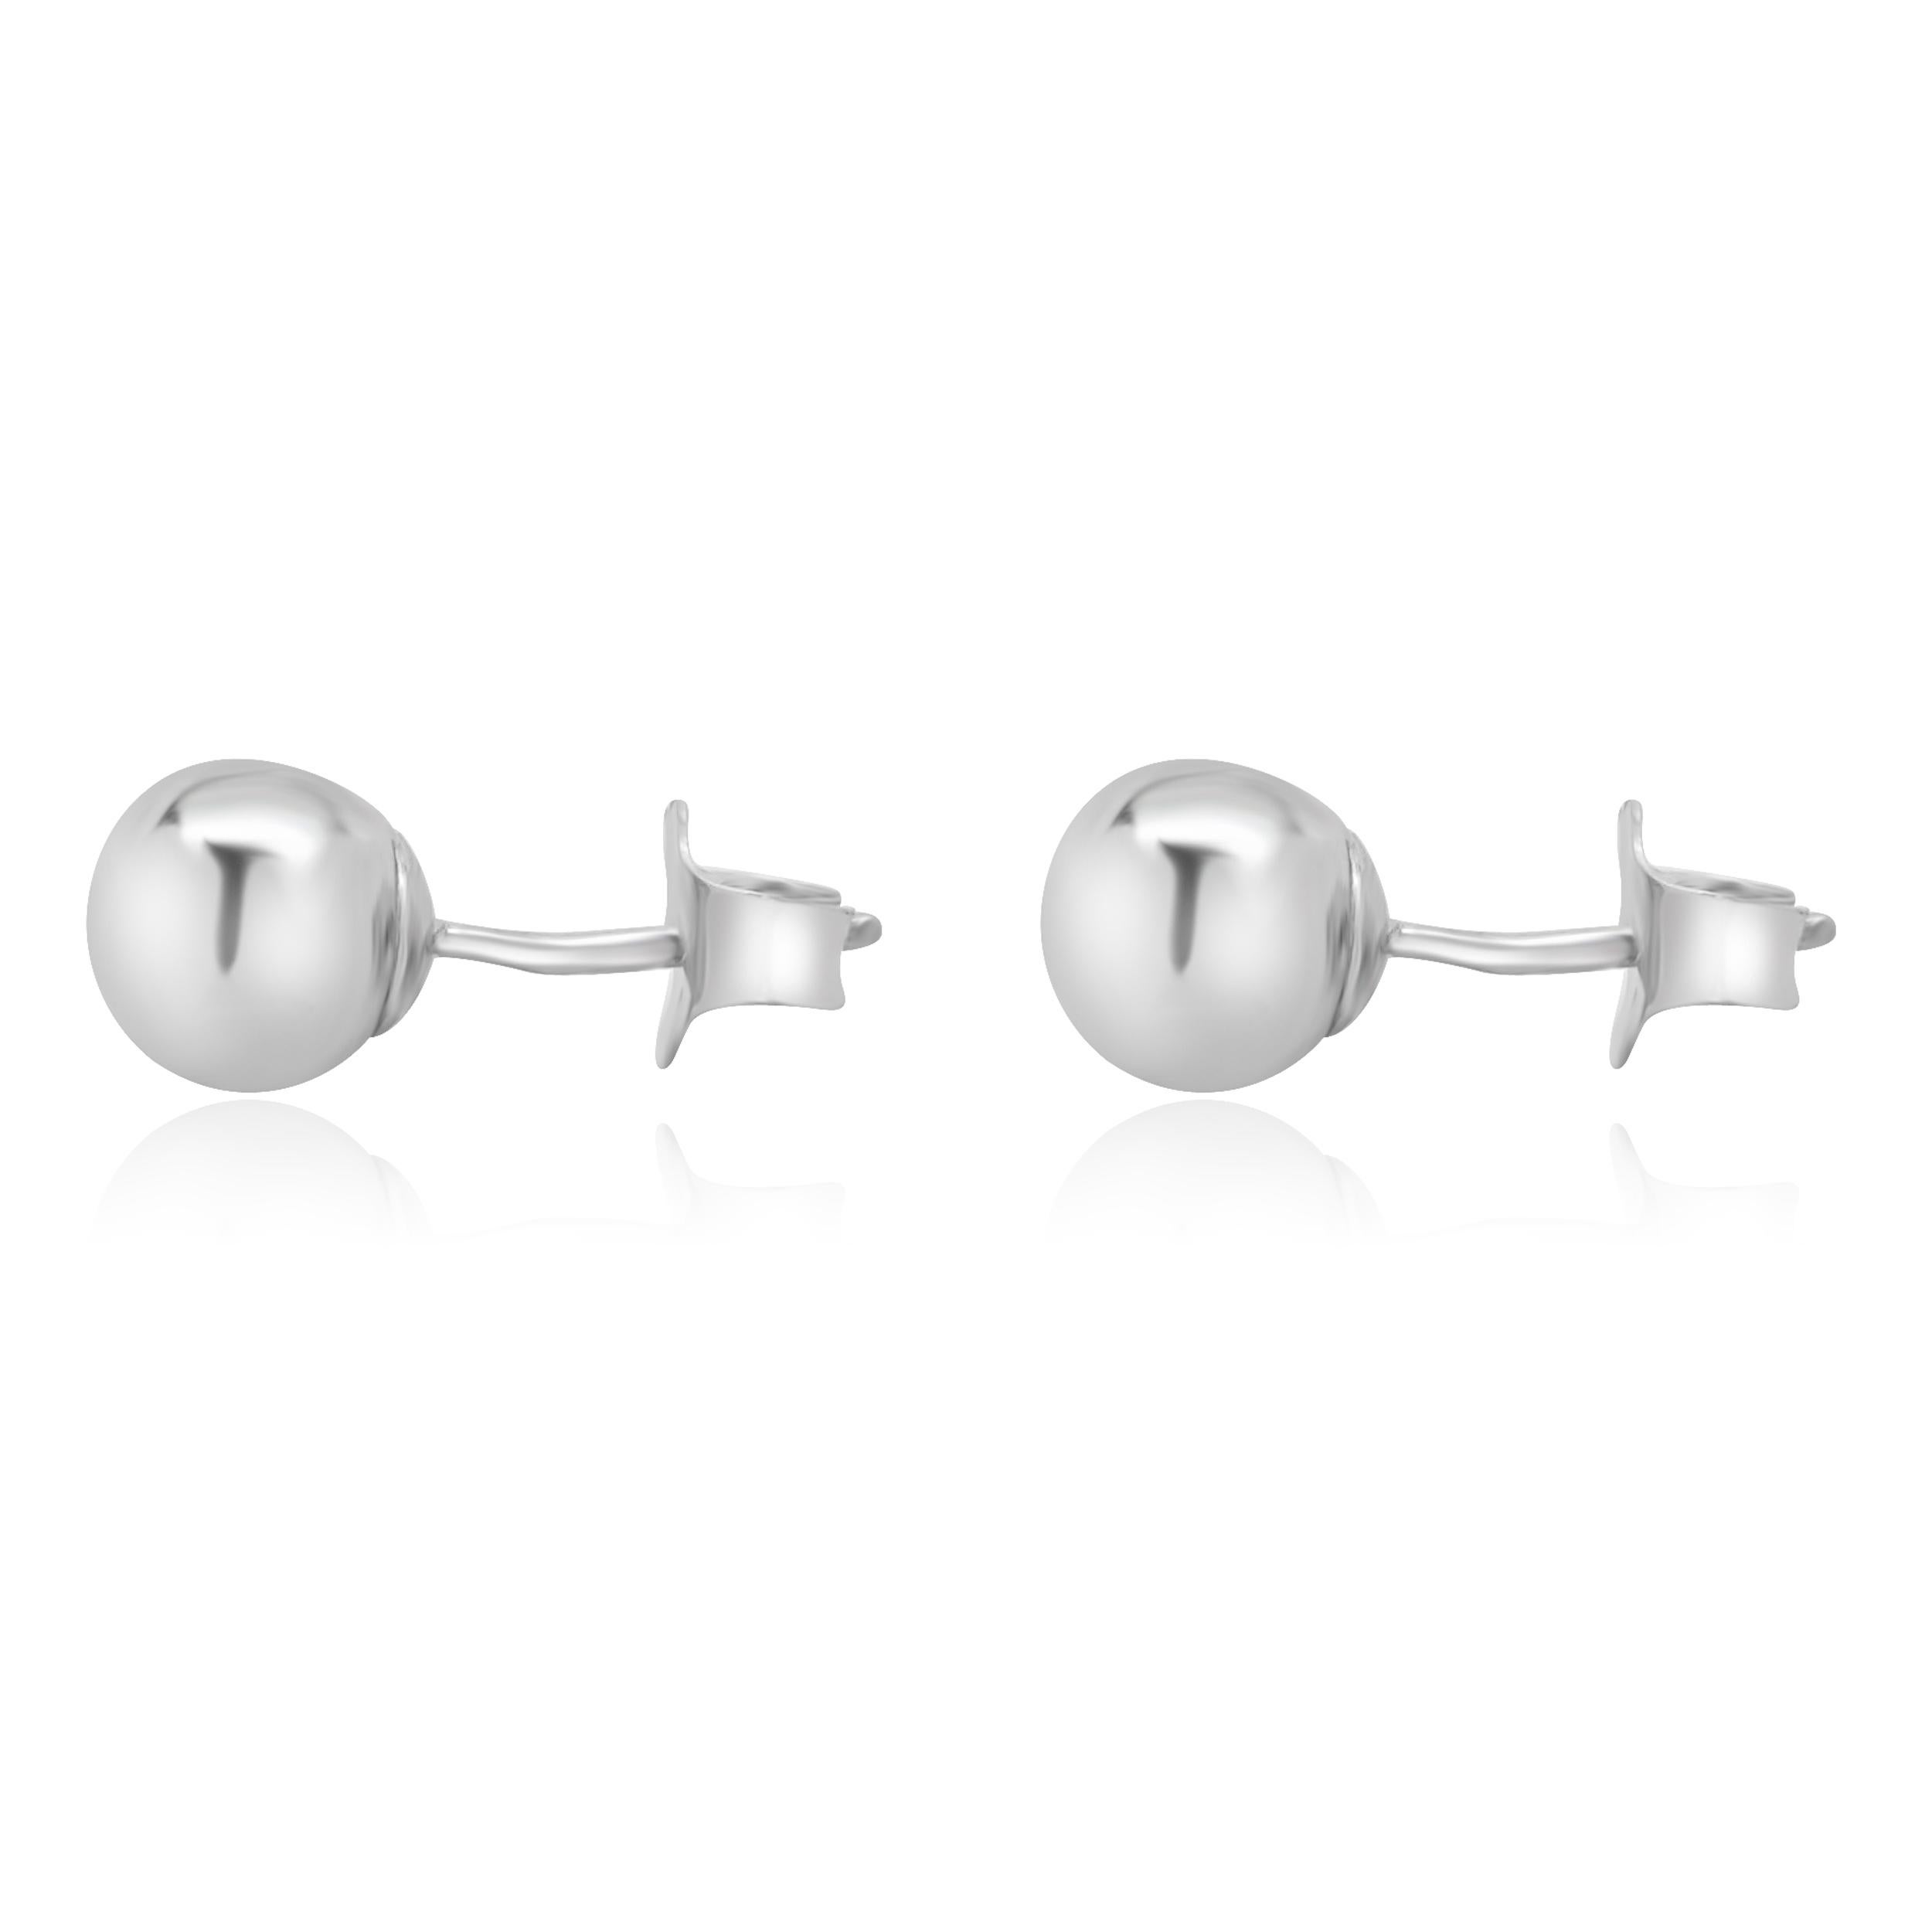 Material: 14K white gold
Dimensions: earrings measure 6mm
Weight:  0.44 grams
